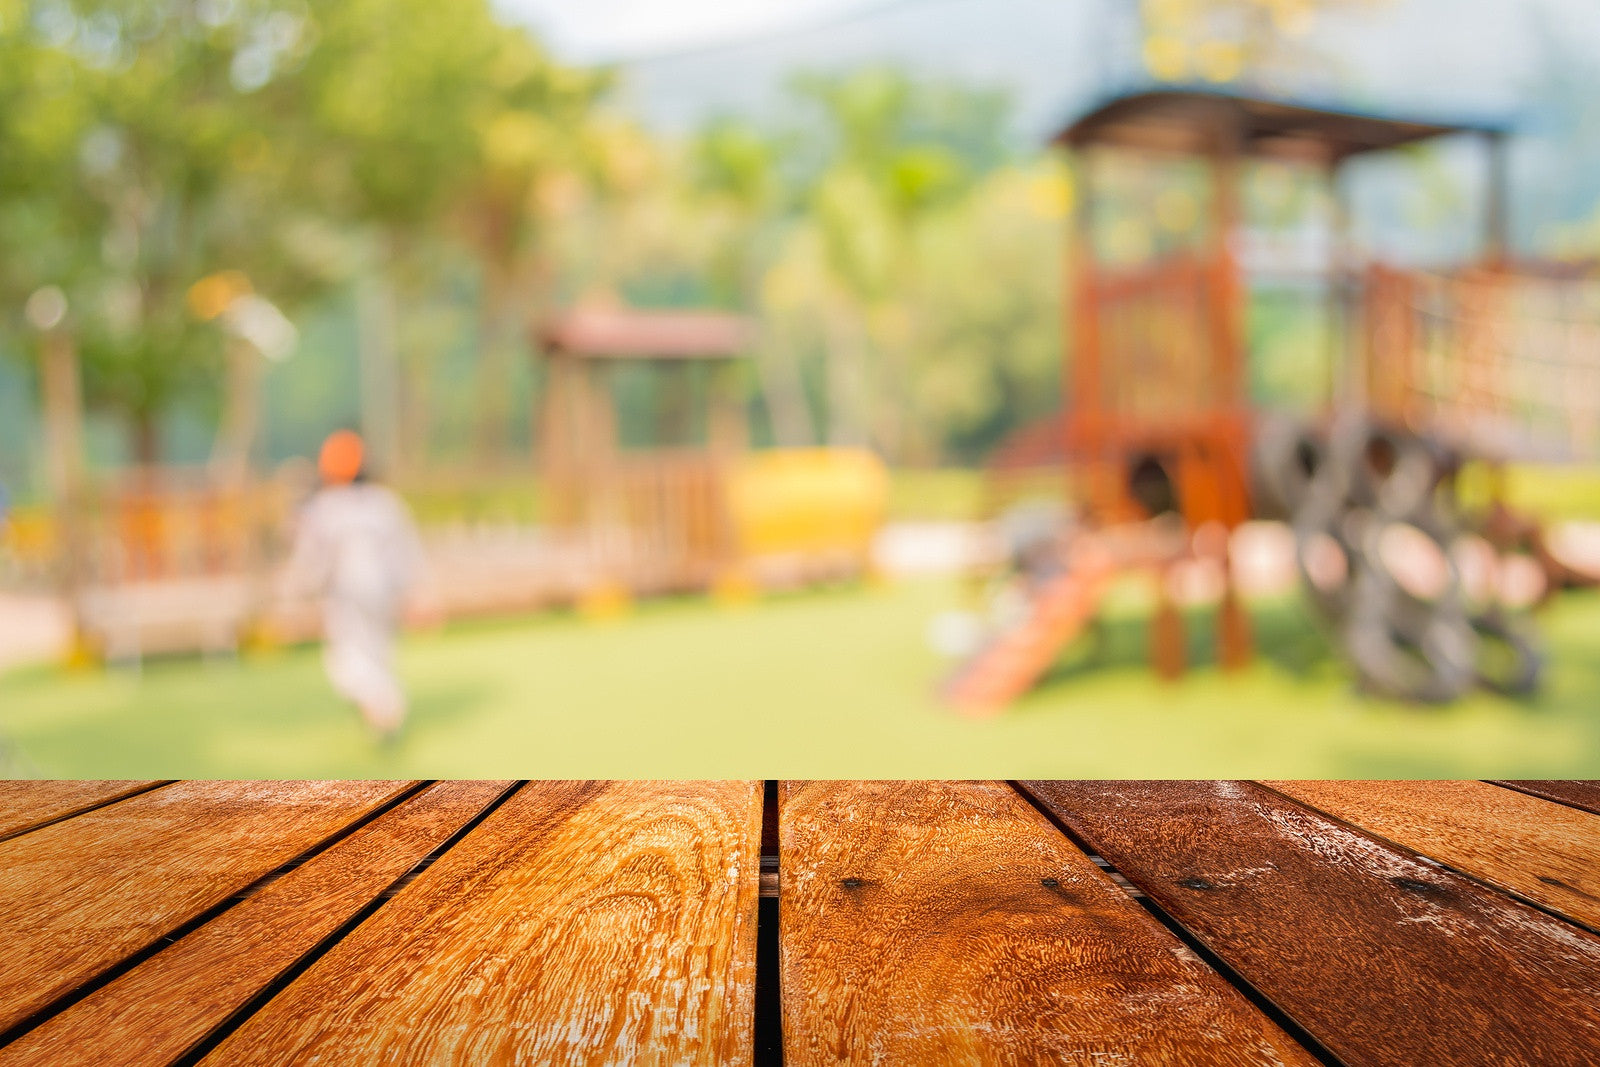 What You Need to Know Before You Buy a Wooden Swing Set